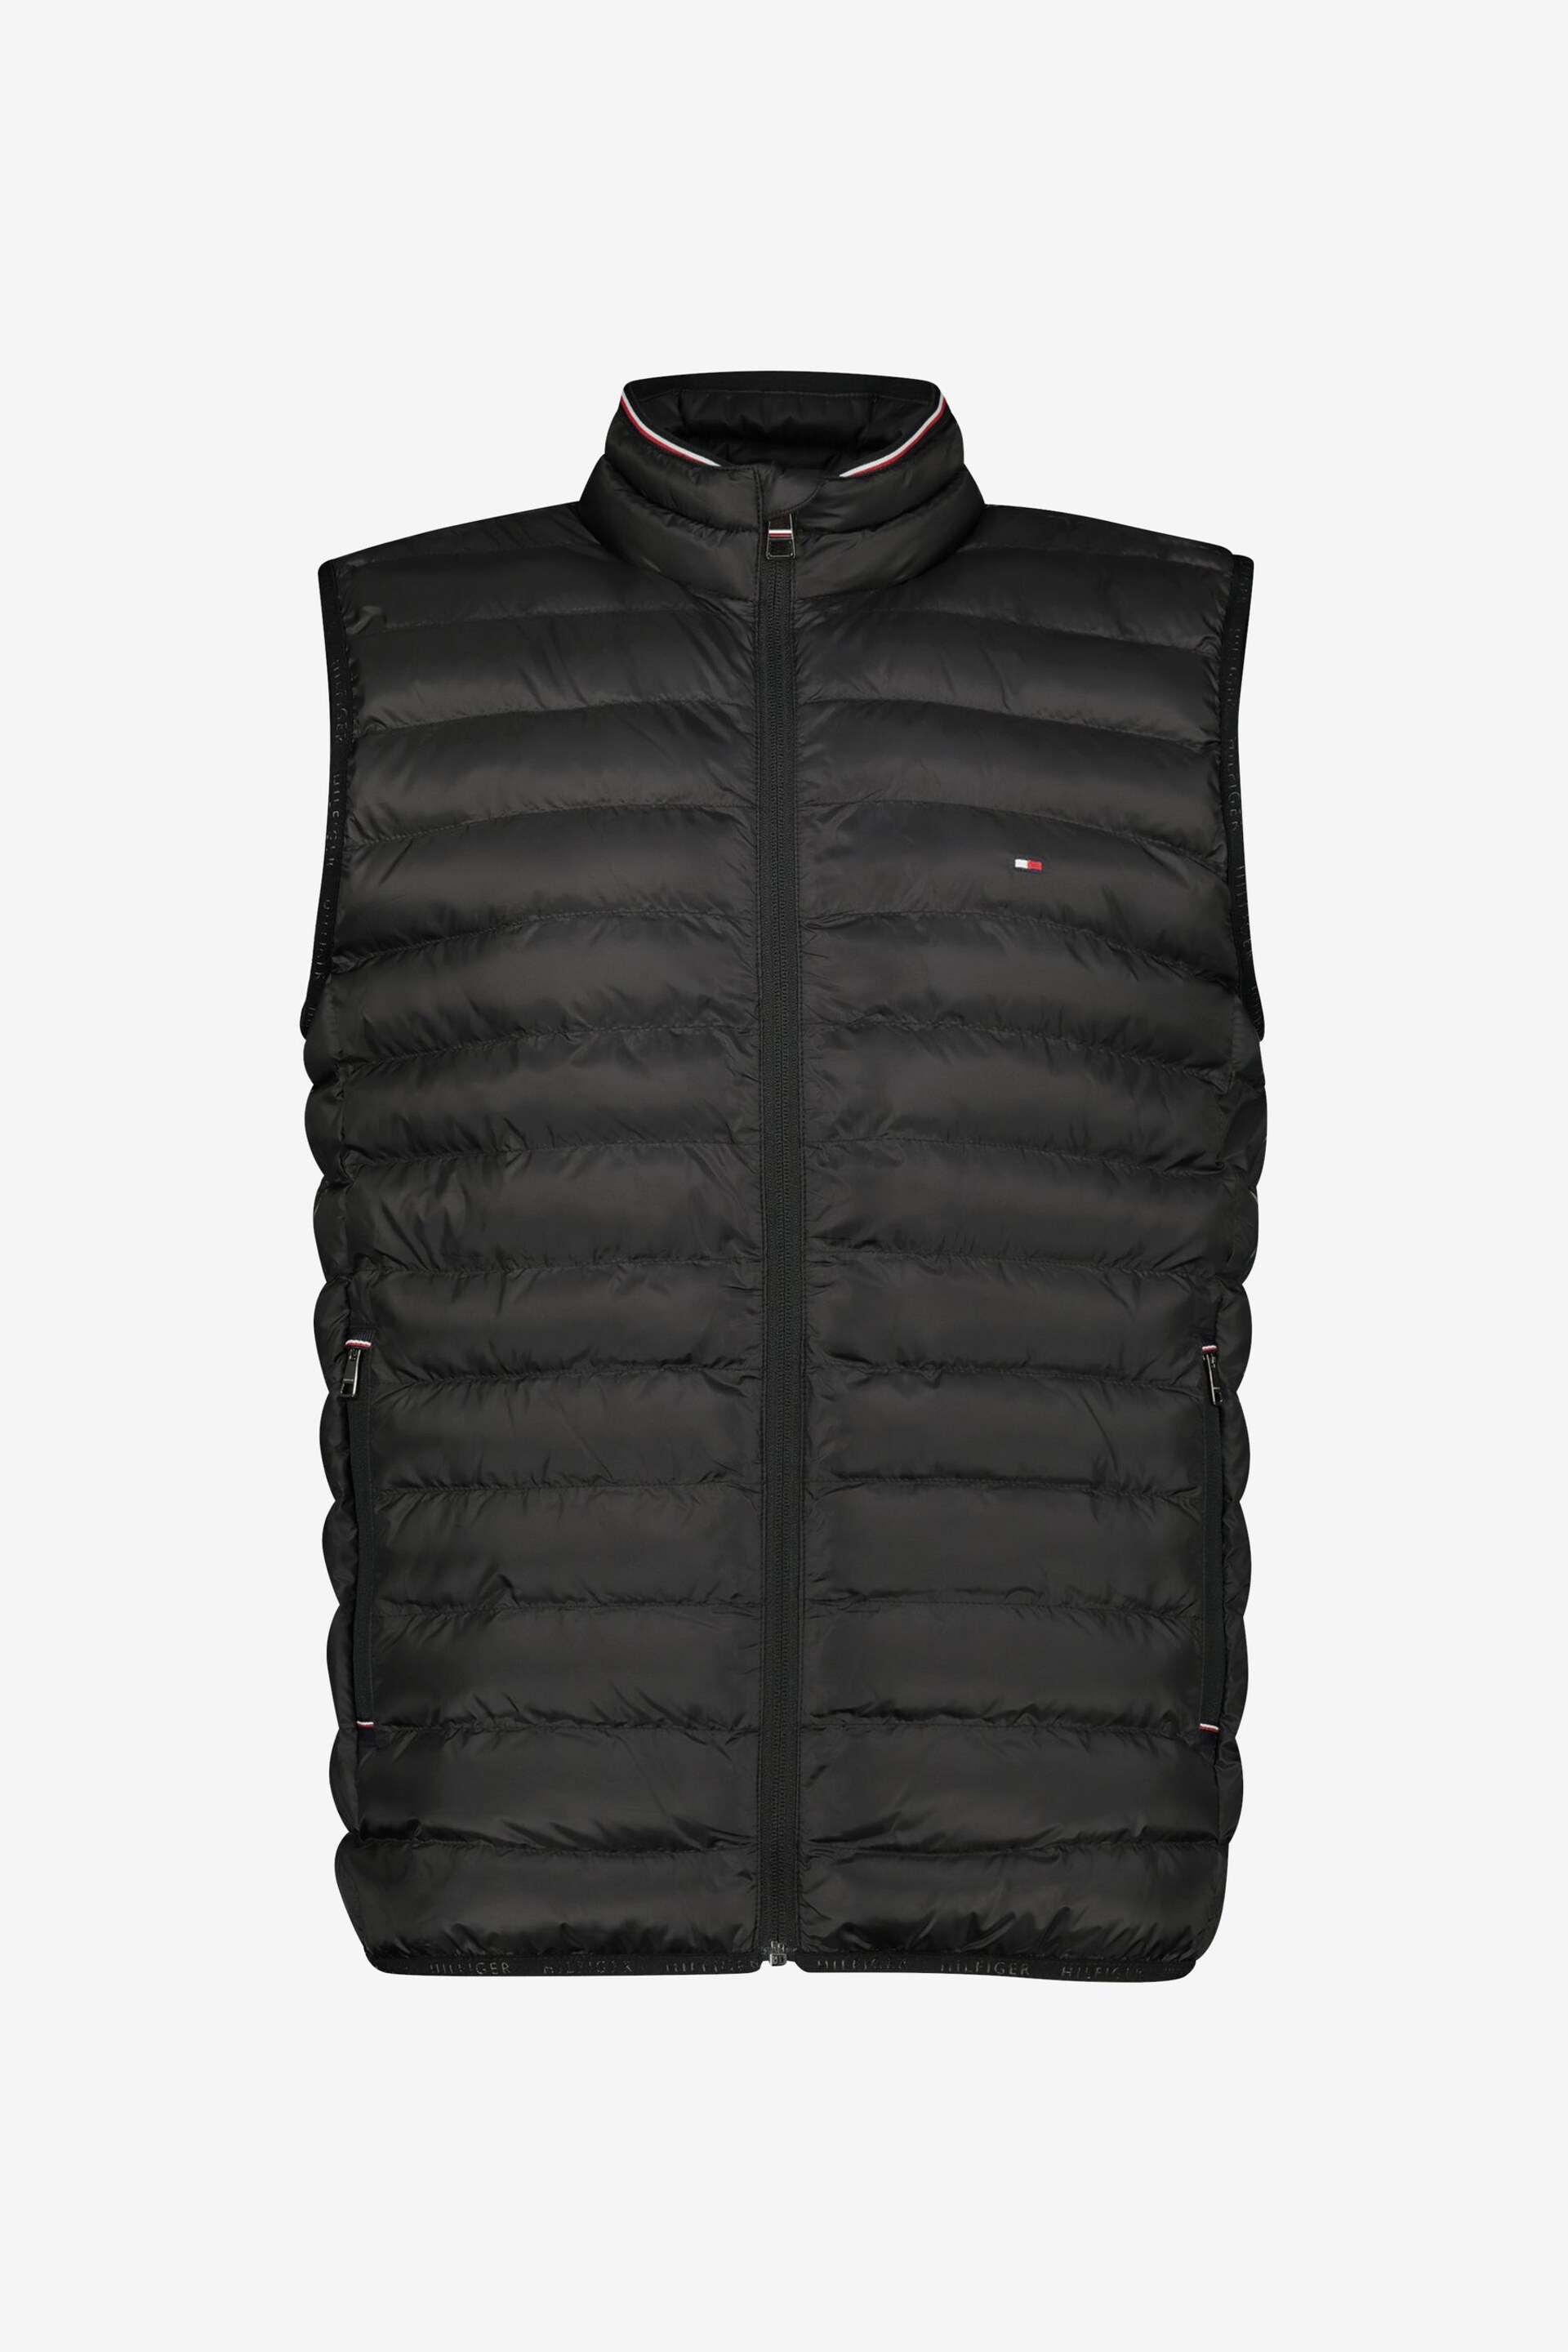 Tommy Hilfiger Core Packable Circular Vest - Image 5 of 5